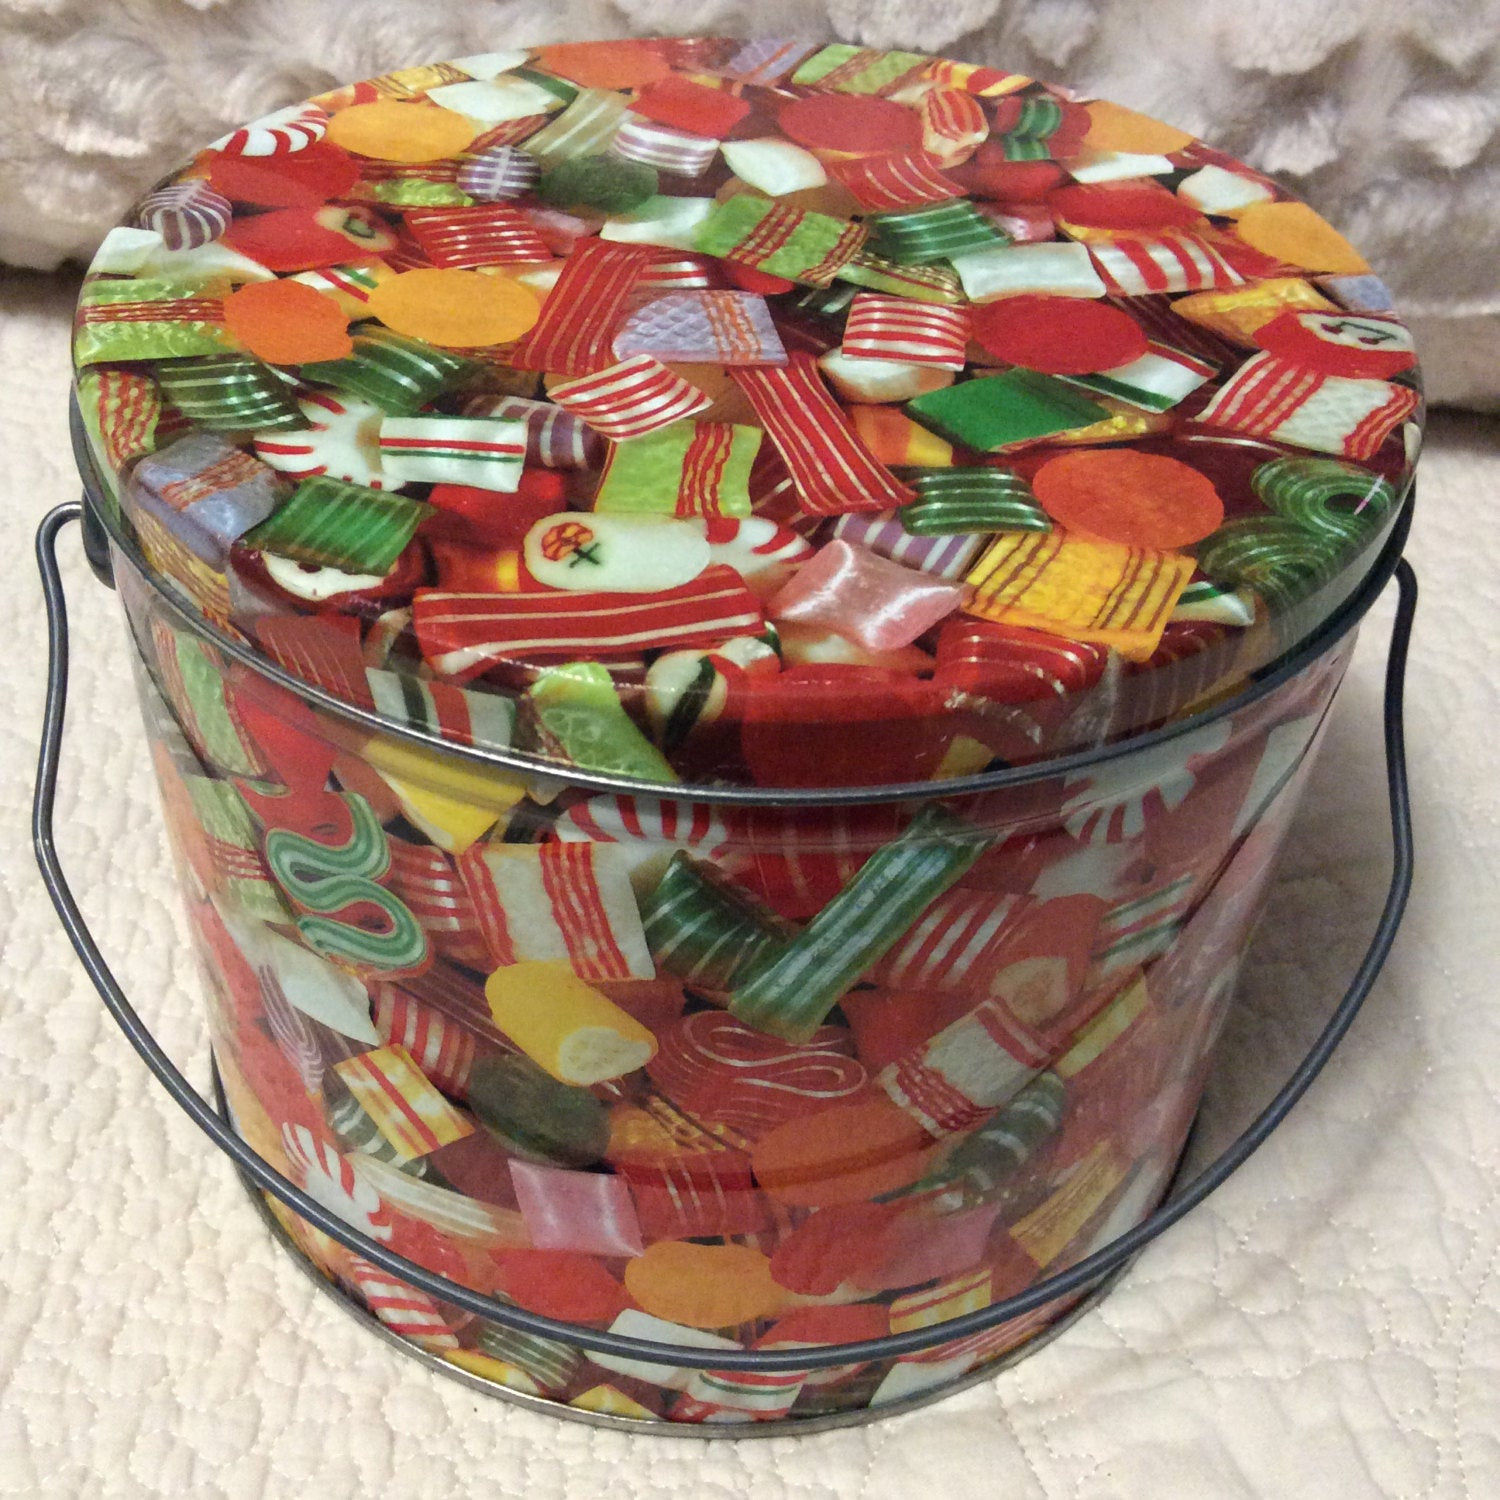 Christmas Candy Tins
 Vintage Hard Candy Christmas Tin Container Pail Handle Bucket